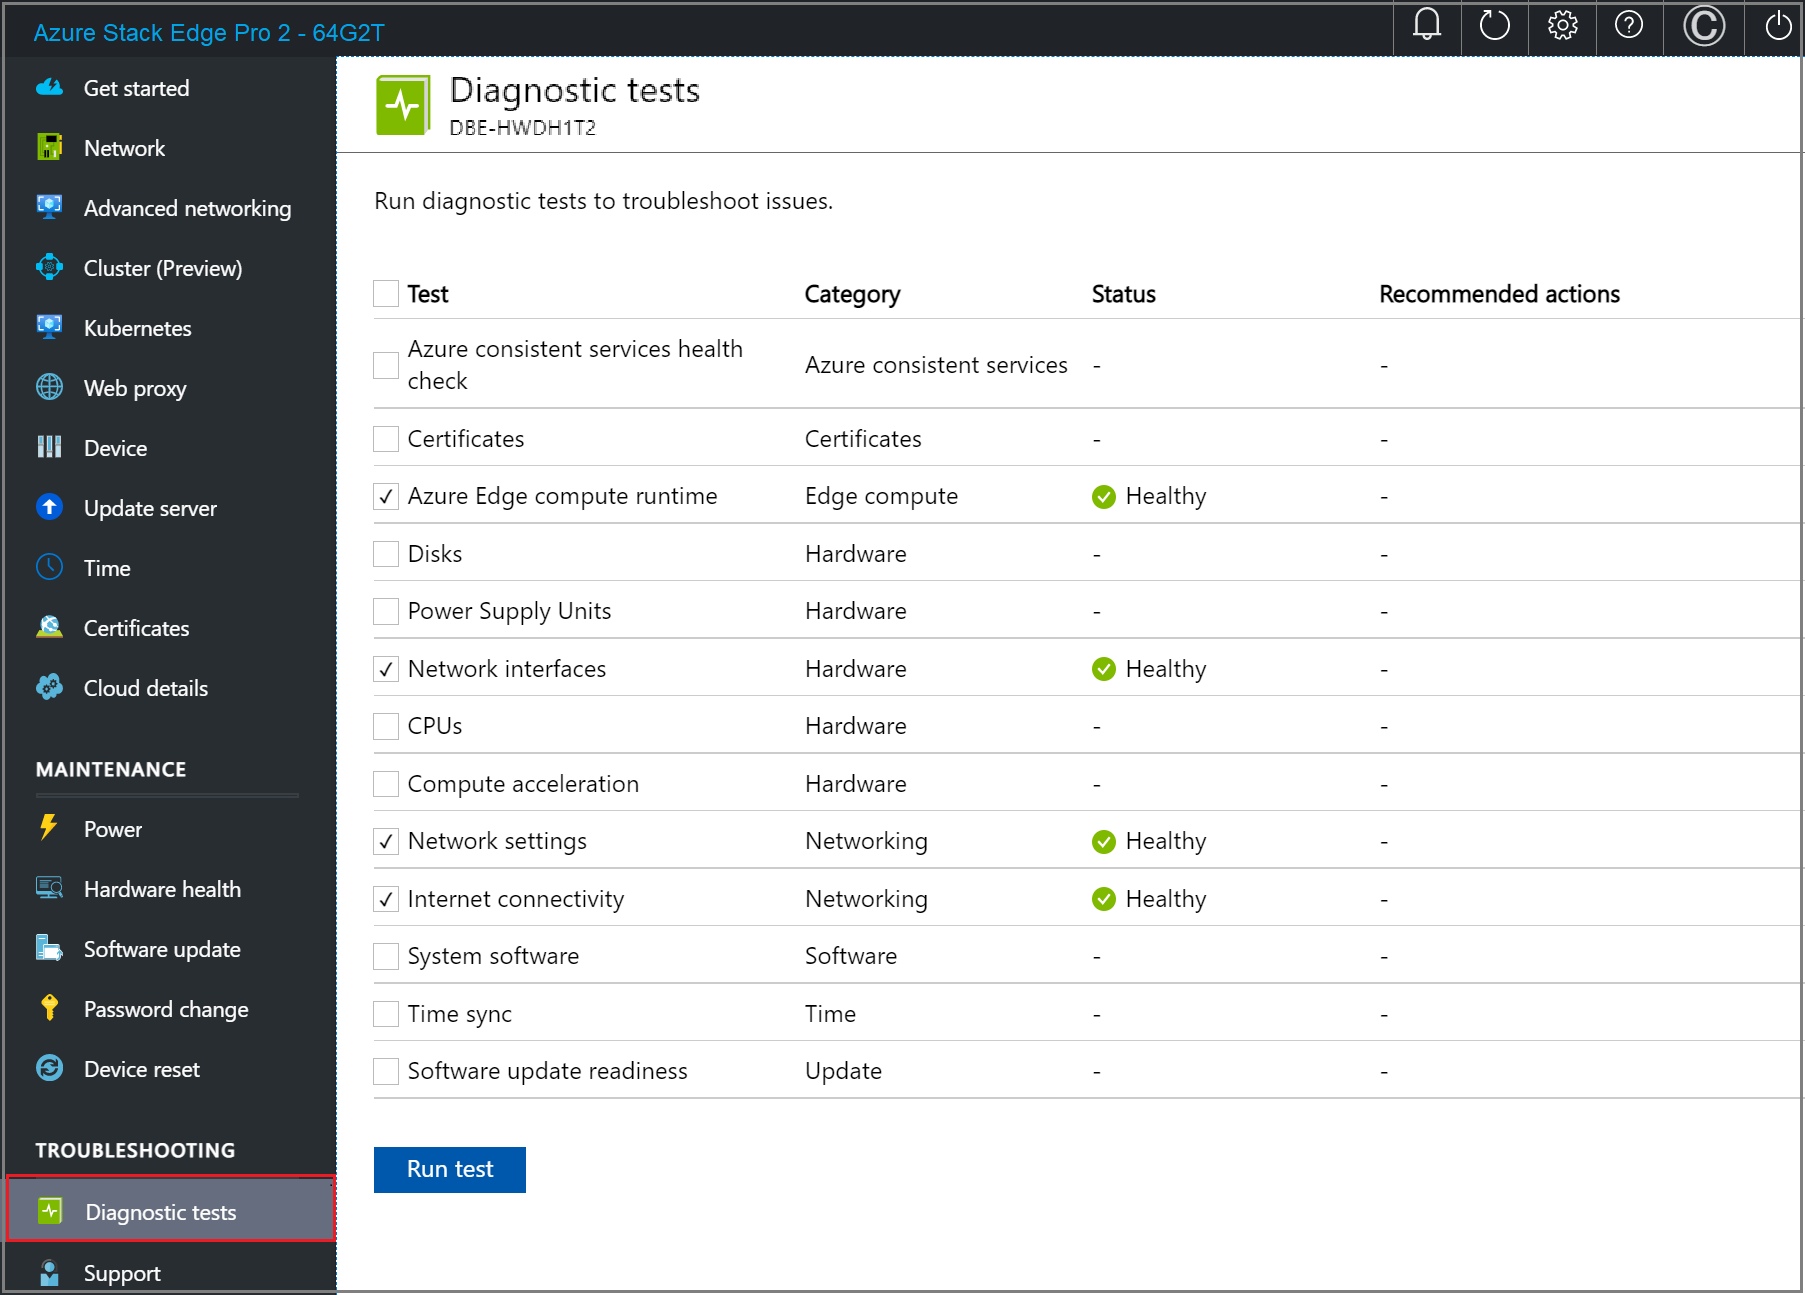 Screenshot of the Diagnostic test results page in the local web UI of an Azure Stack Edge device.